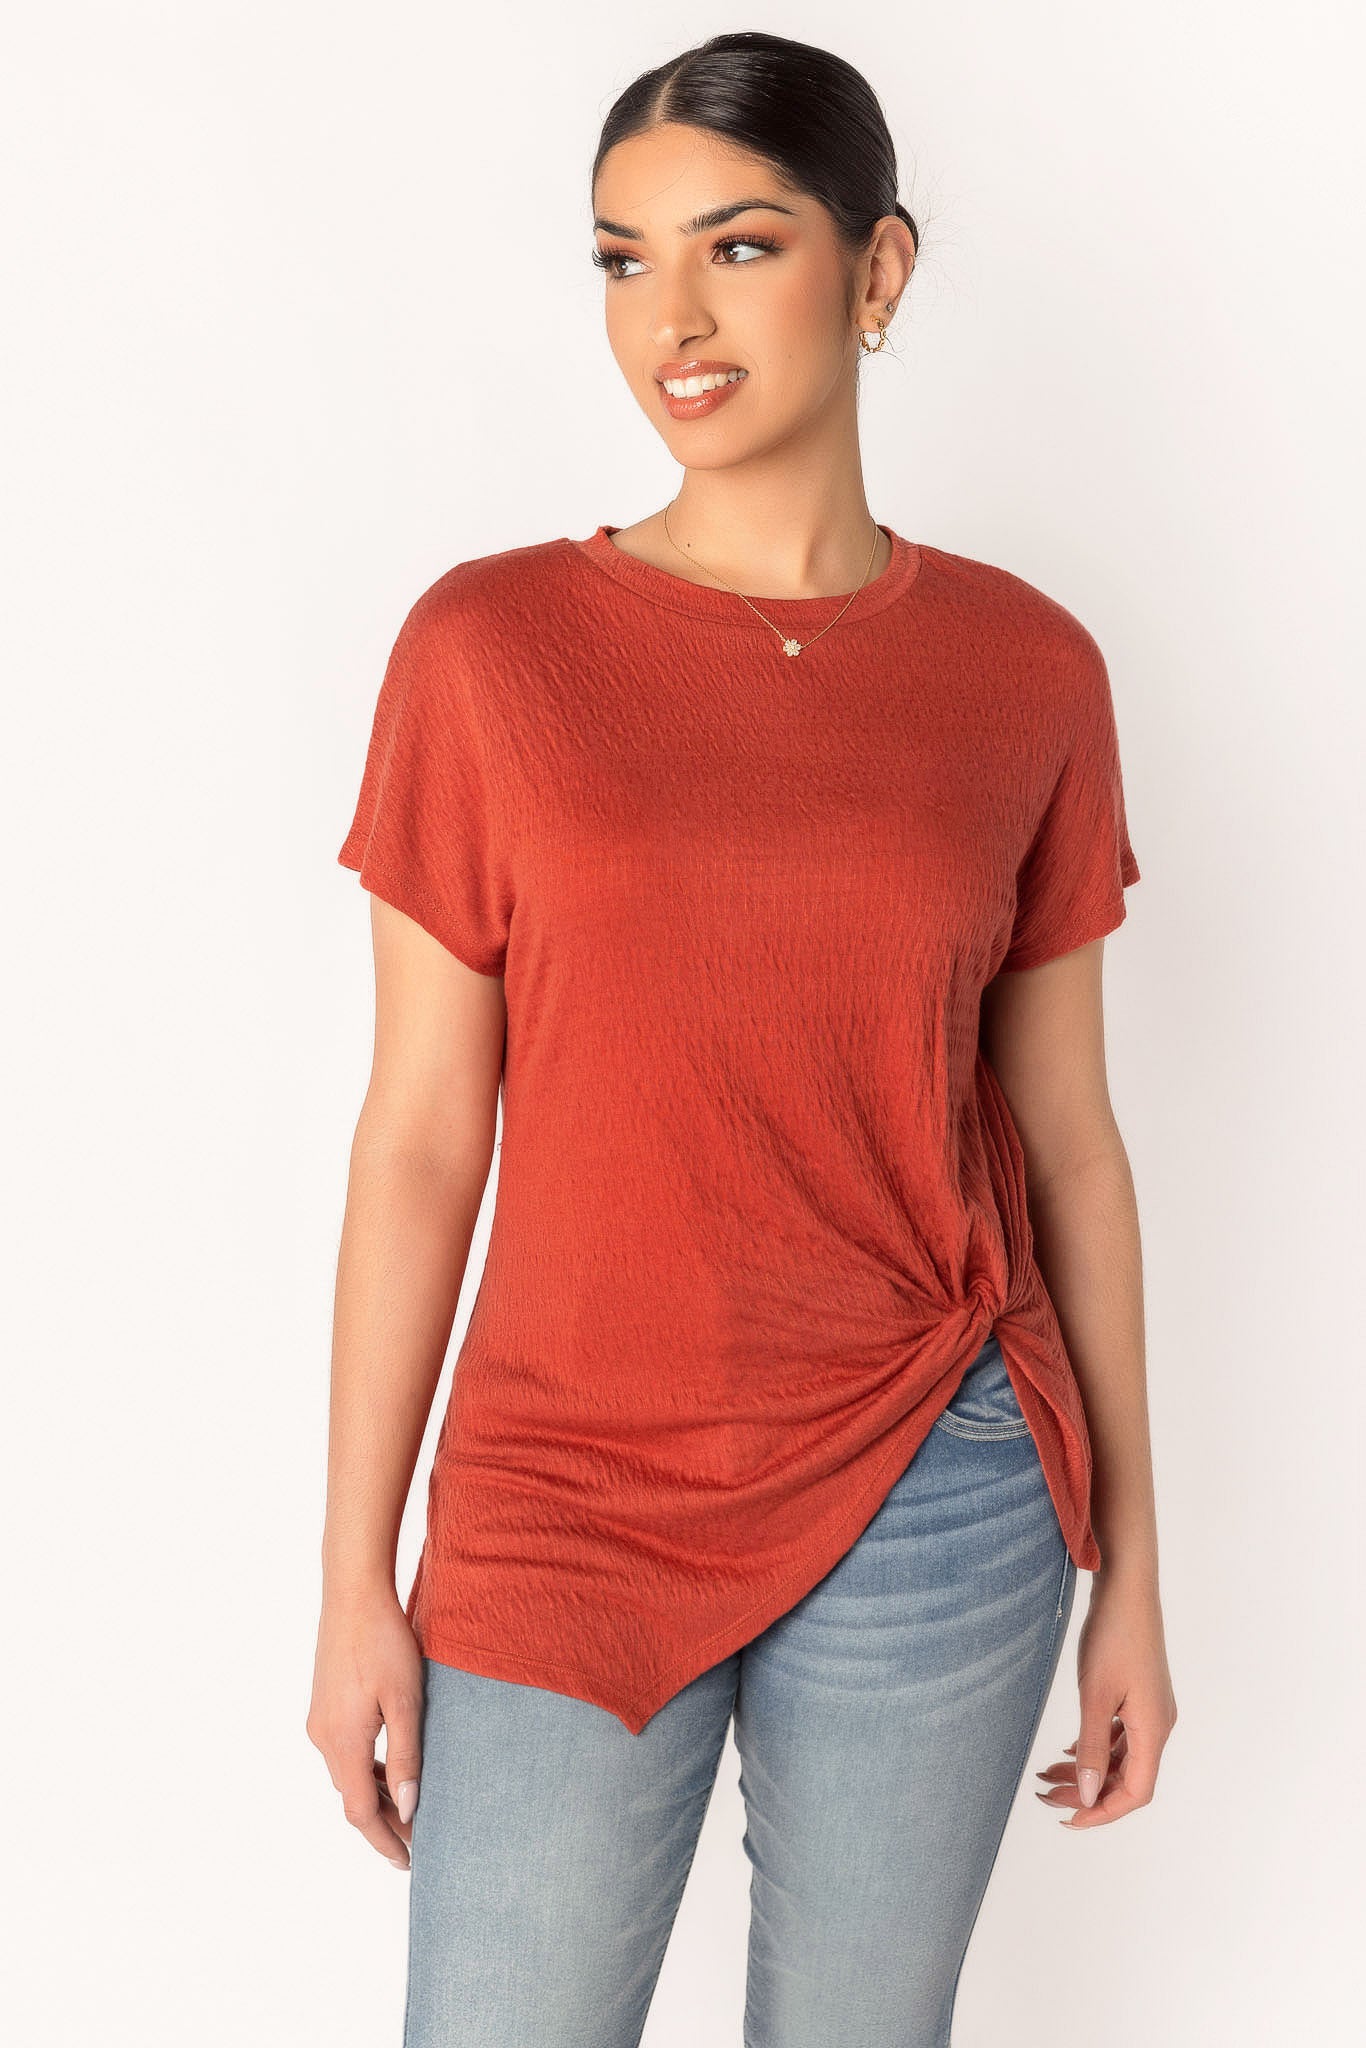 Textured Knit Tee with Knotted Hem